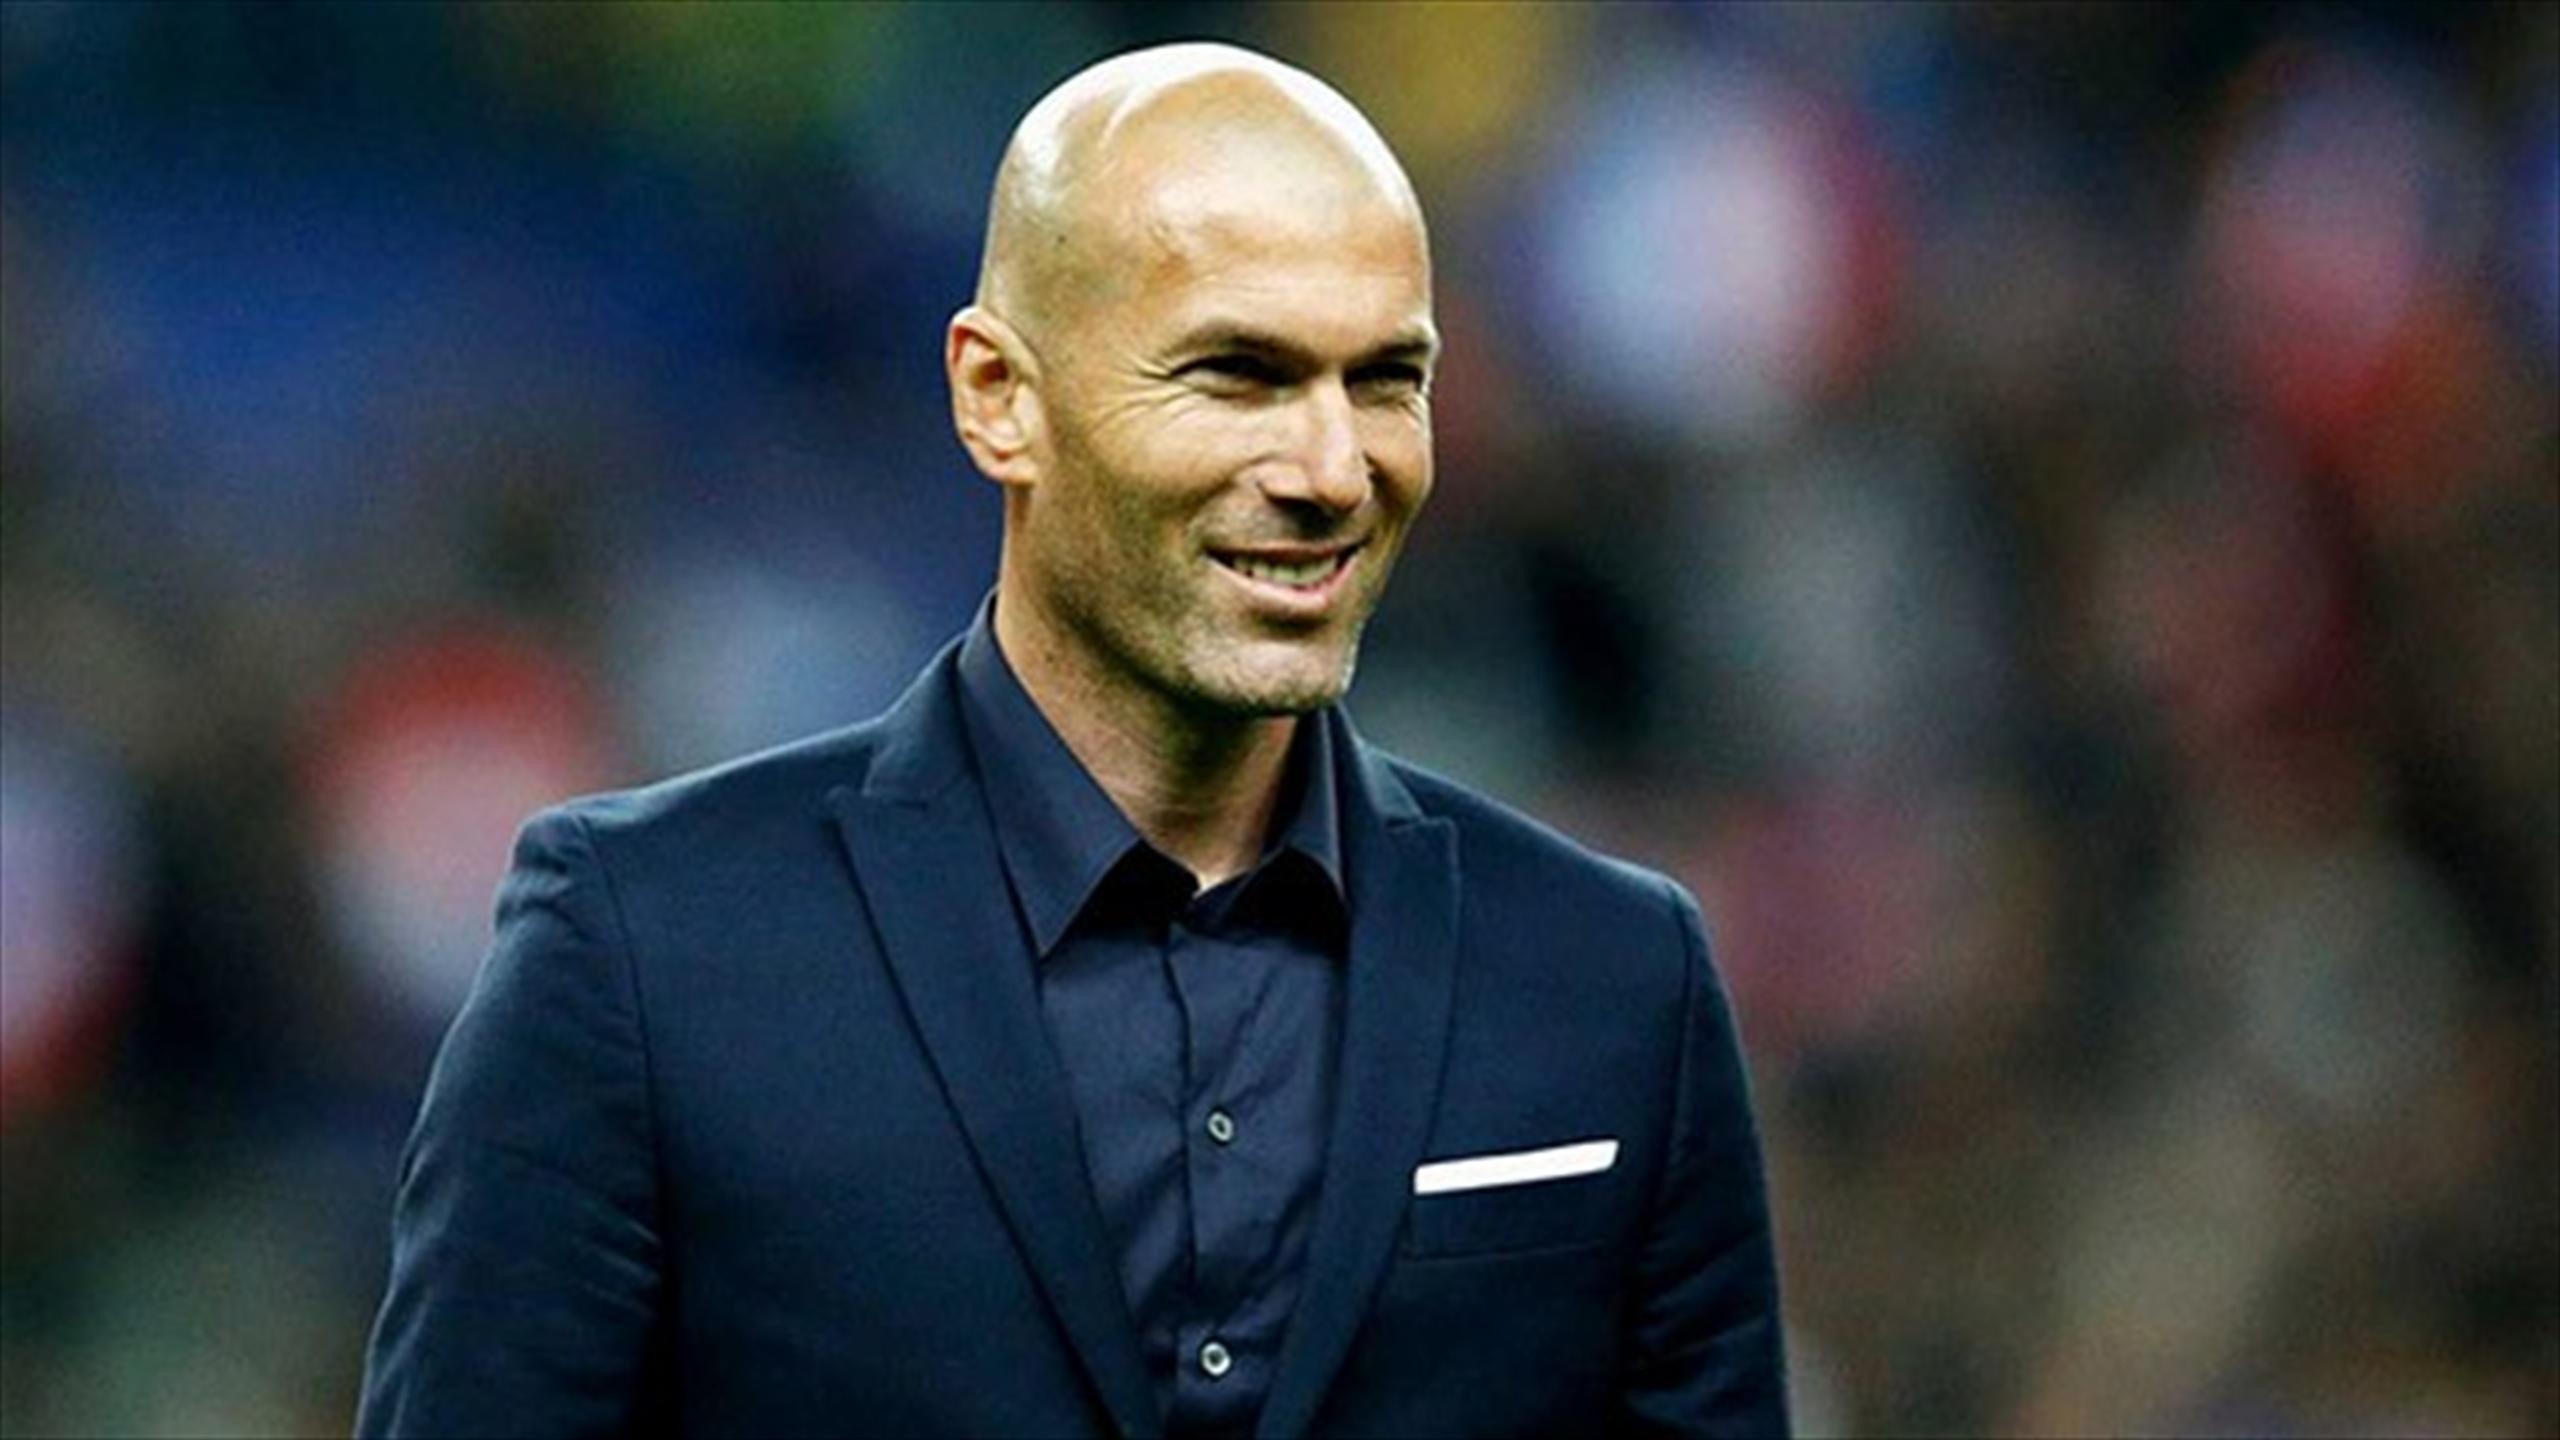 2560x1440 Download Zinedine Zidane HD Wallpaper for free in high definition quality  and are available in different